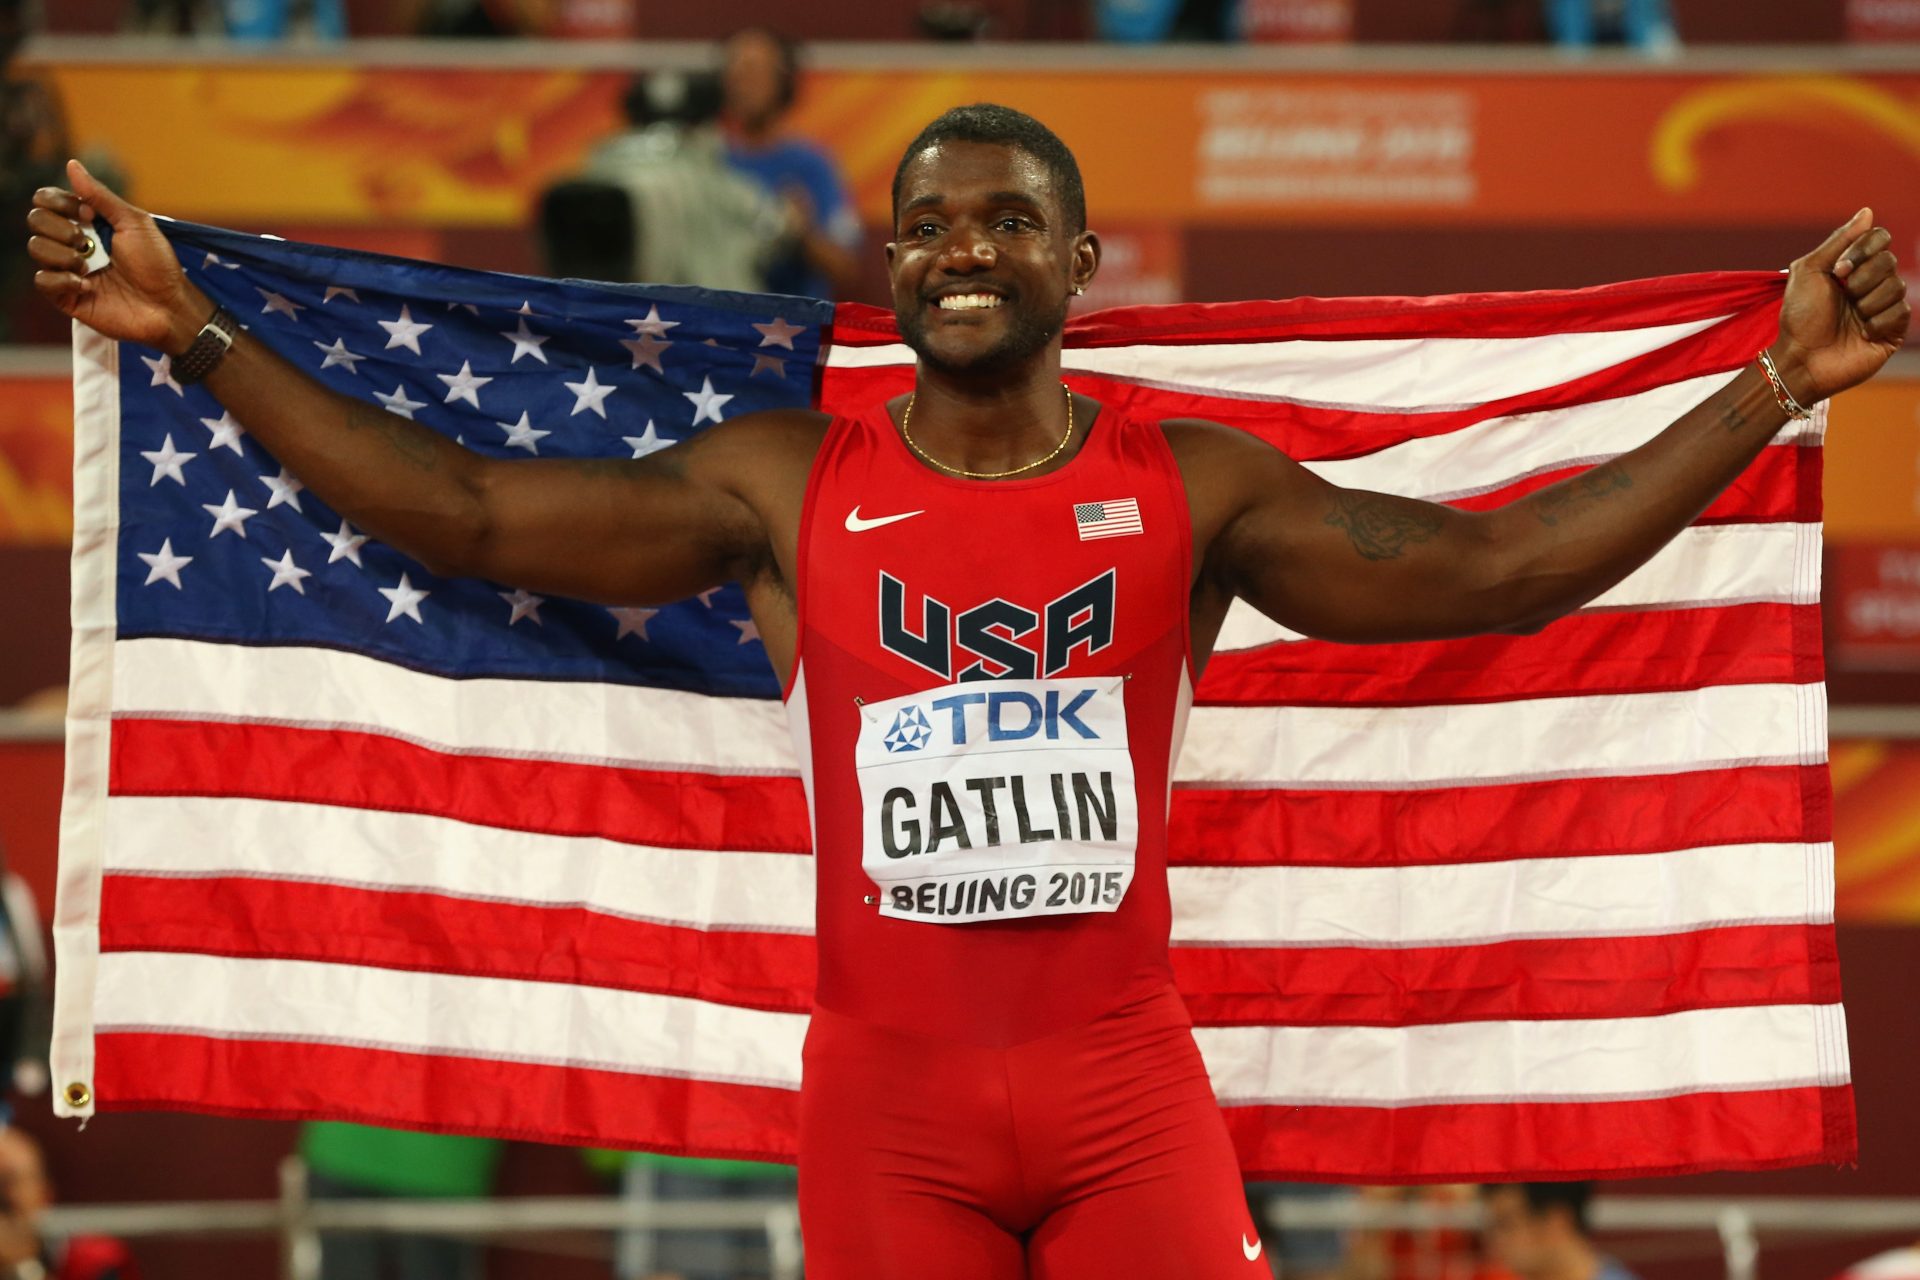 Justin Gatlin: The career and controversy of one of the fastest men in history